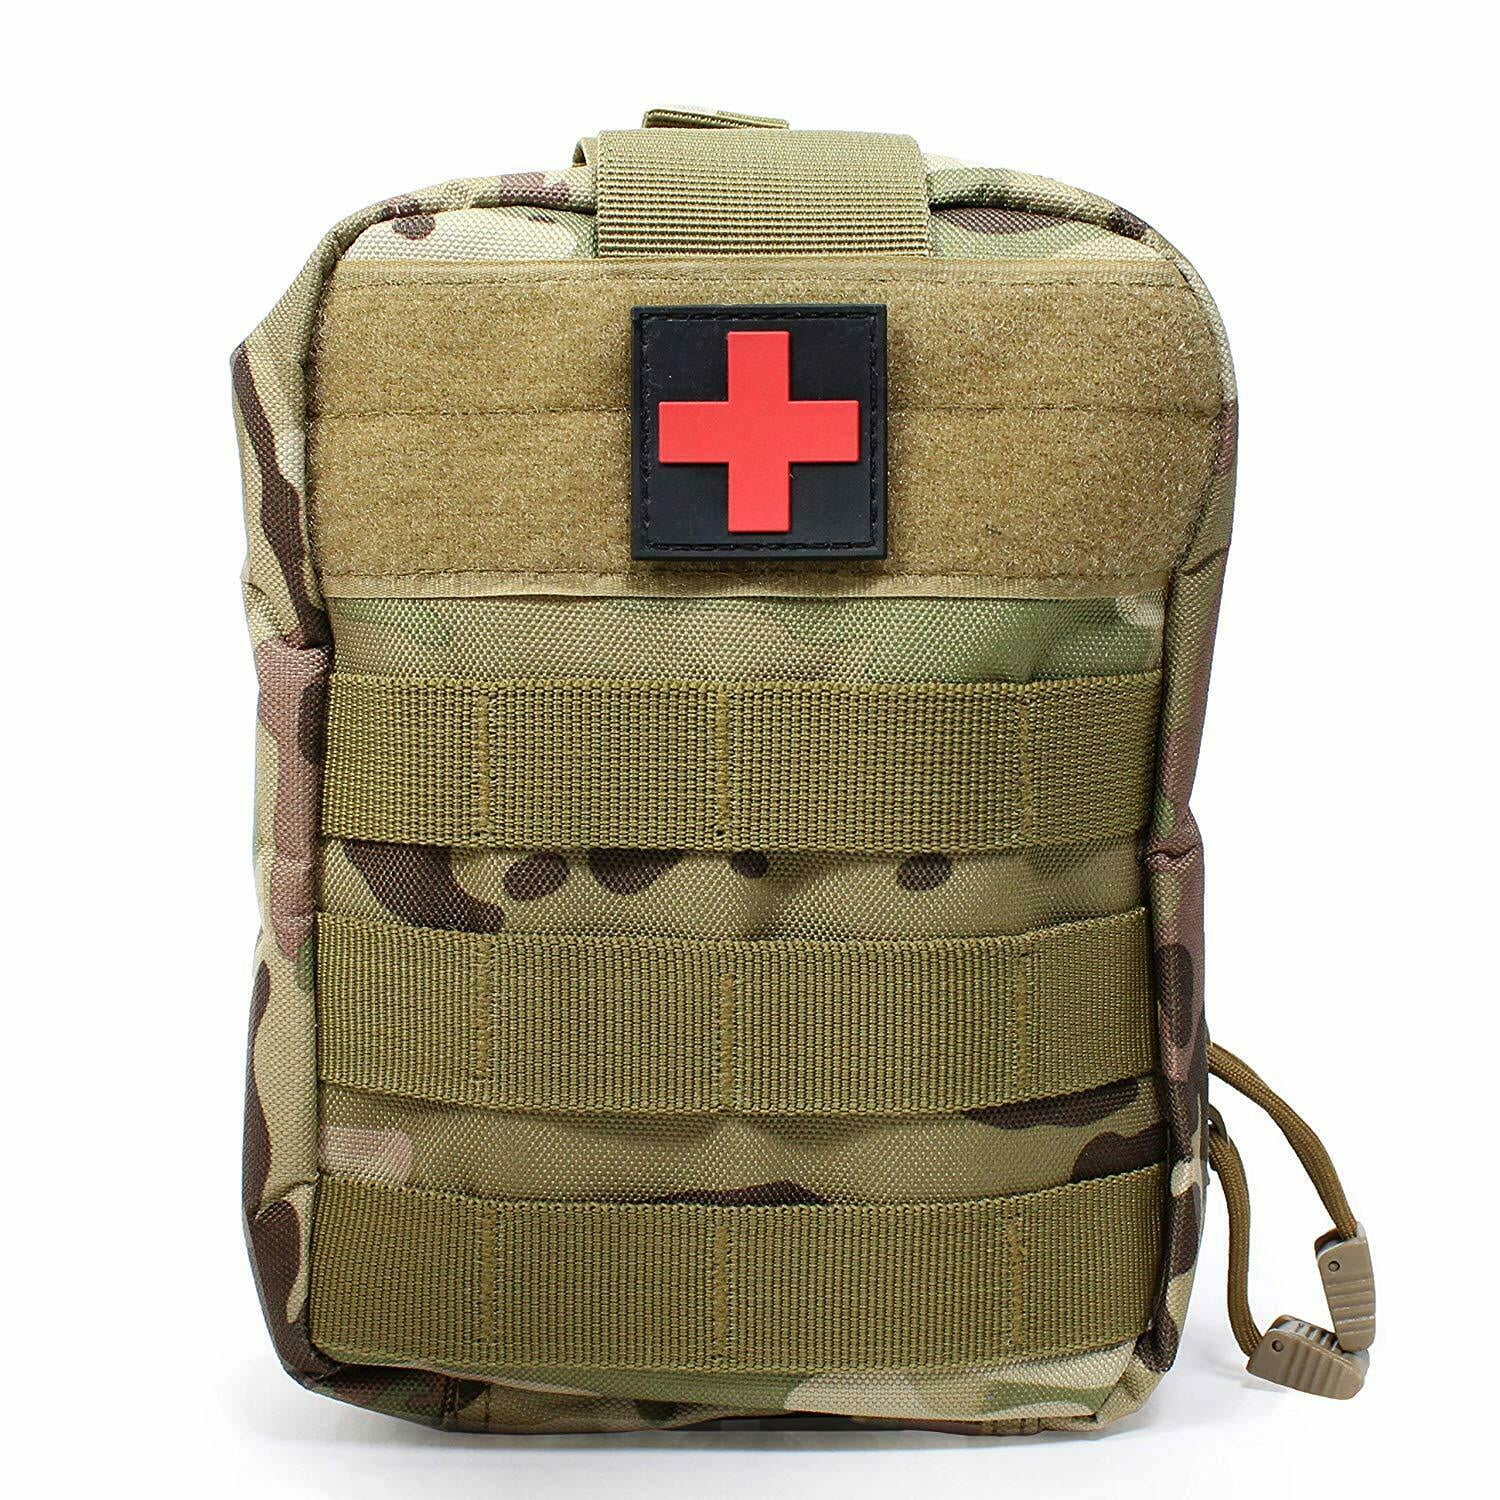 Tactical 1000D Molle Pouch EDC Waist Pack Medic First Aid EMT Bag Phone Pocket 